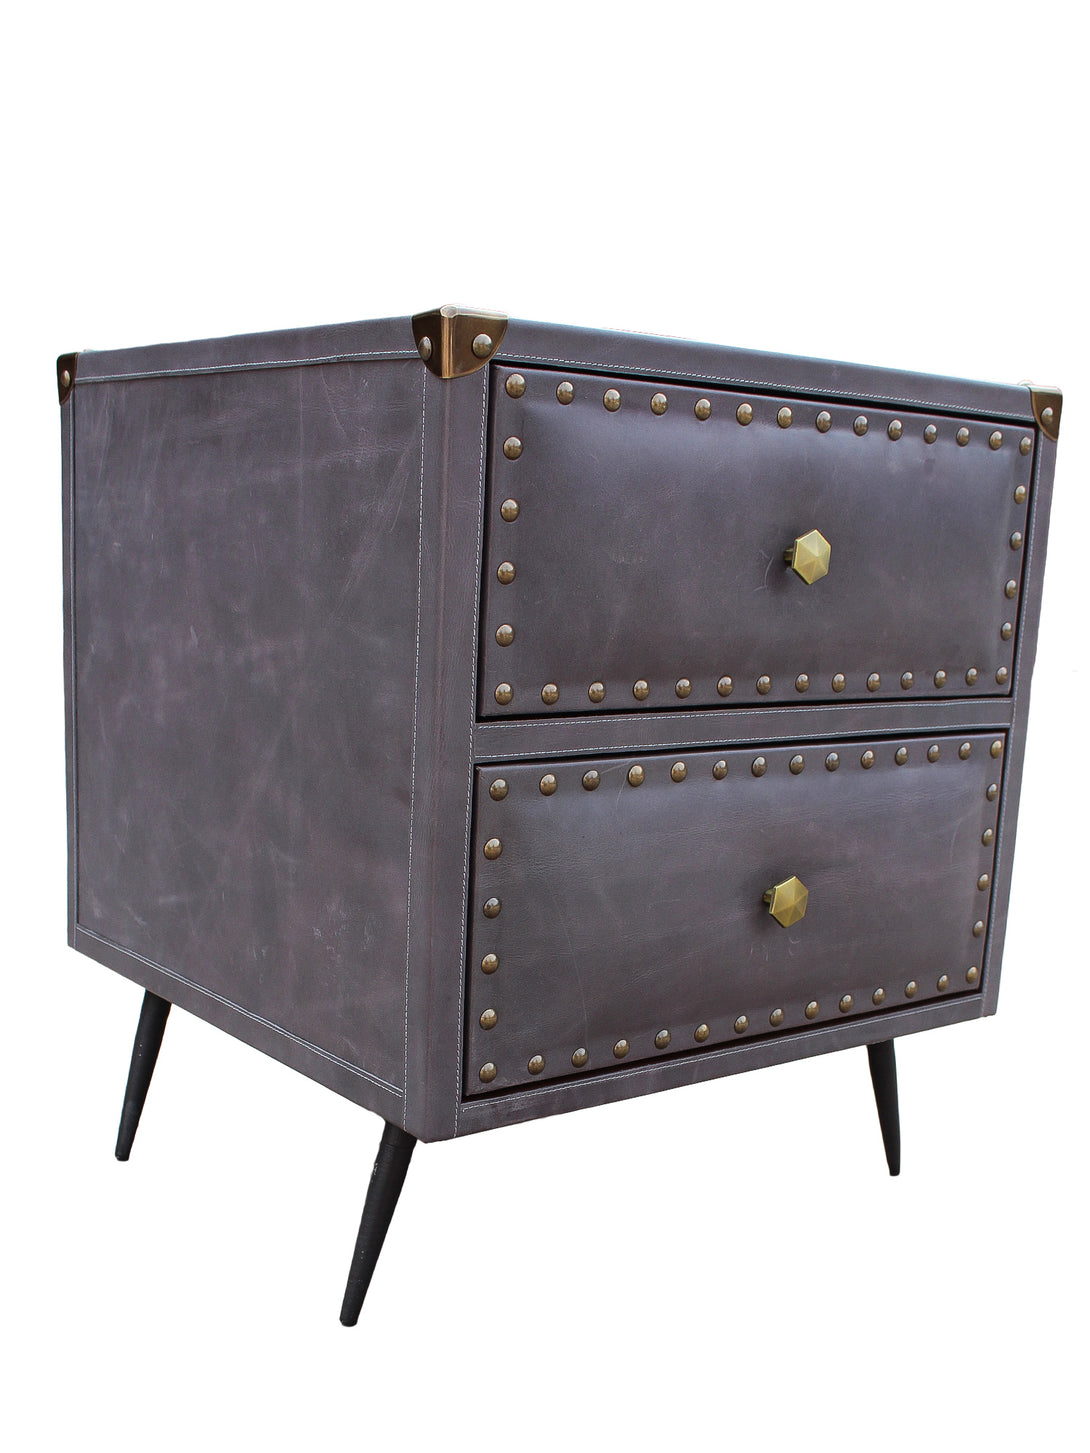 BROOKLYN - TWO DRAWER LEATHER SIDE TABLE - ART AVENUE